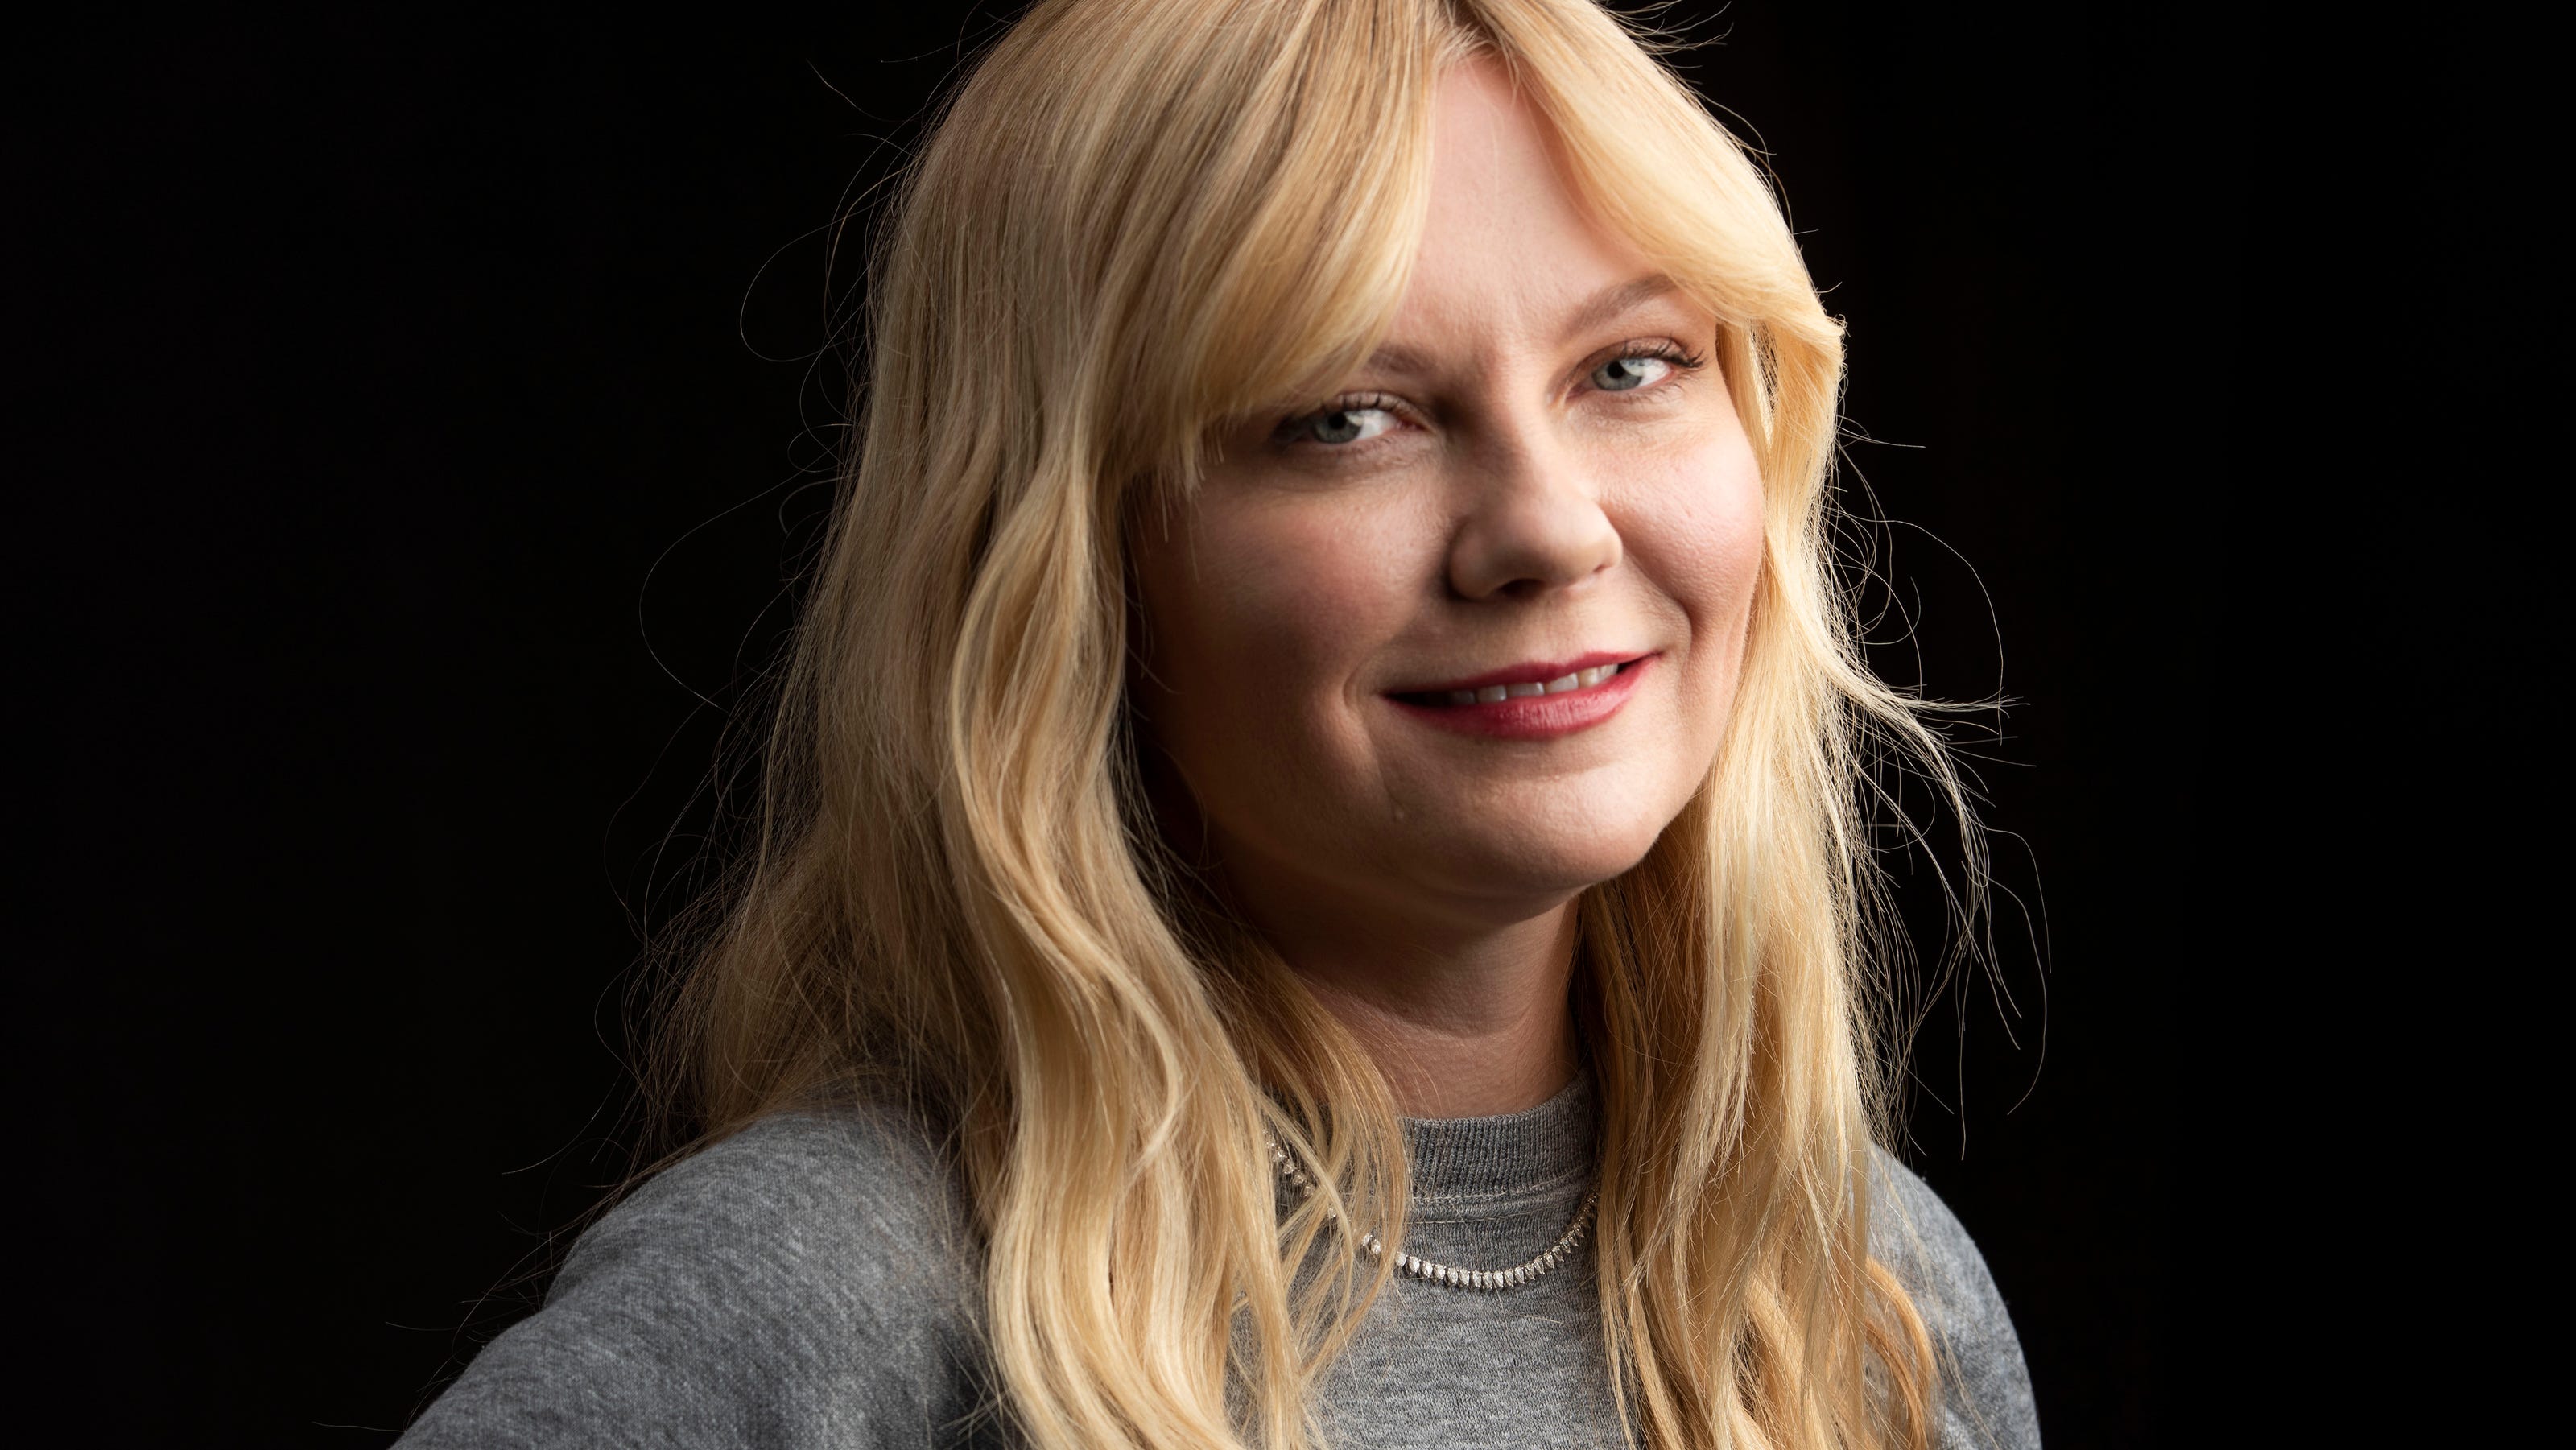 Kirsten Dunst says that she's 'never been recognized in my industry'